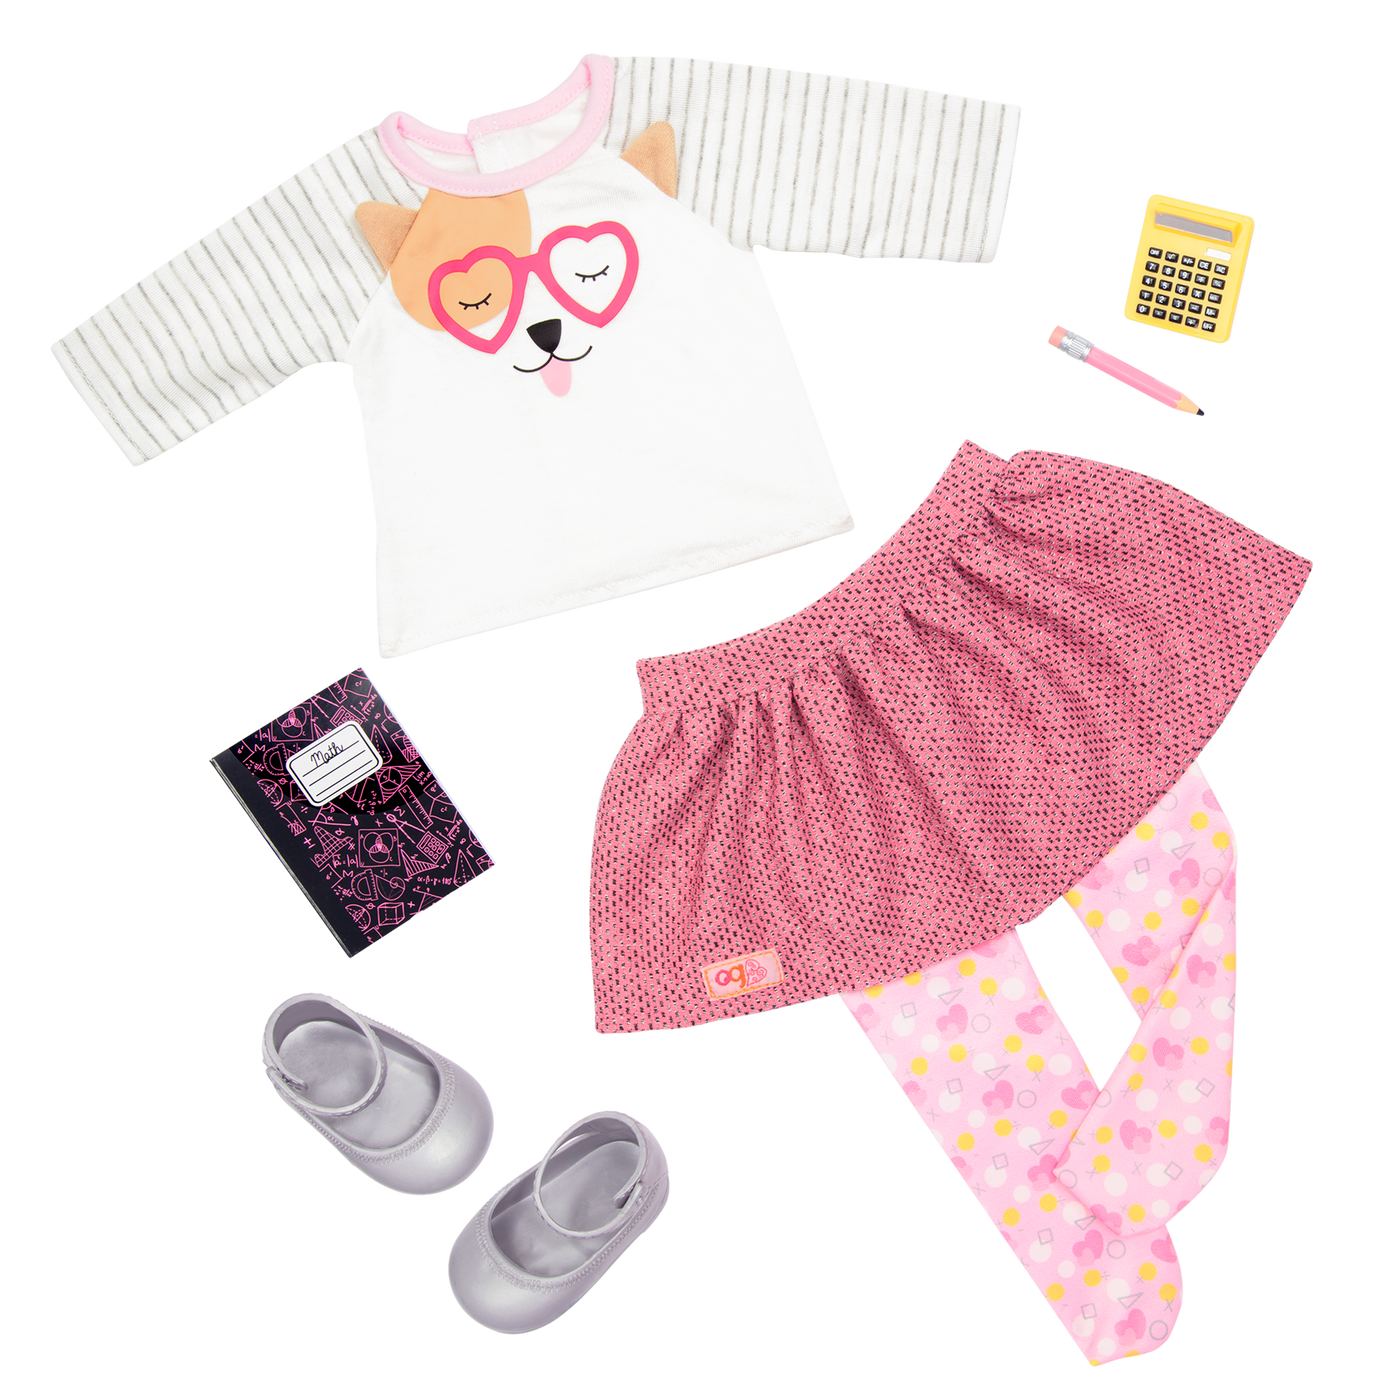 Outfit with school supplies for 18-inch doll